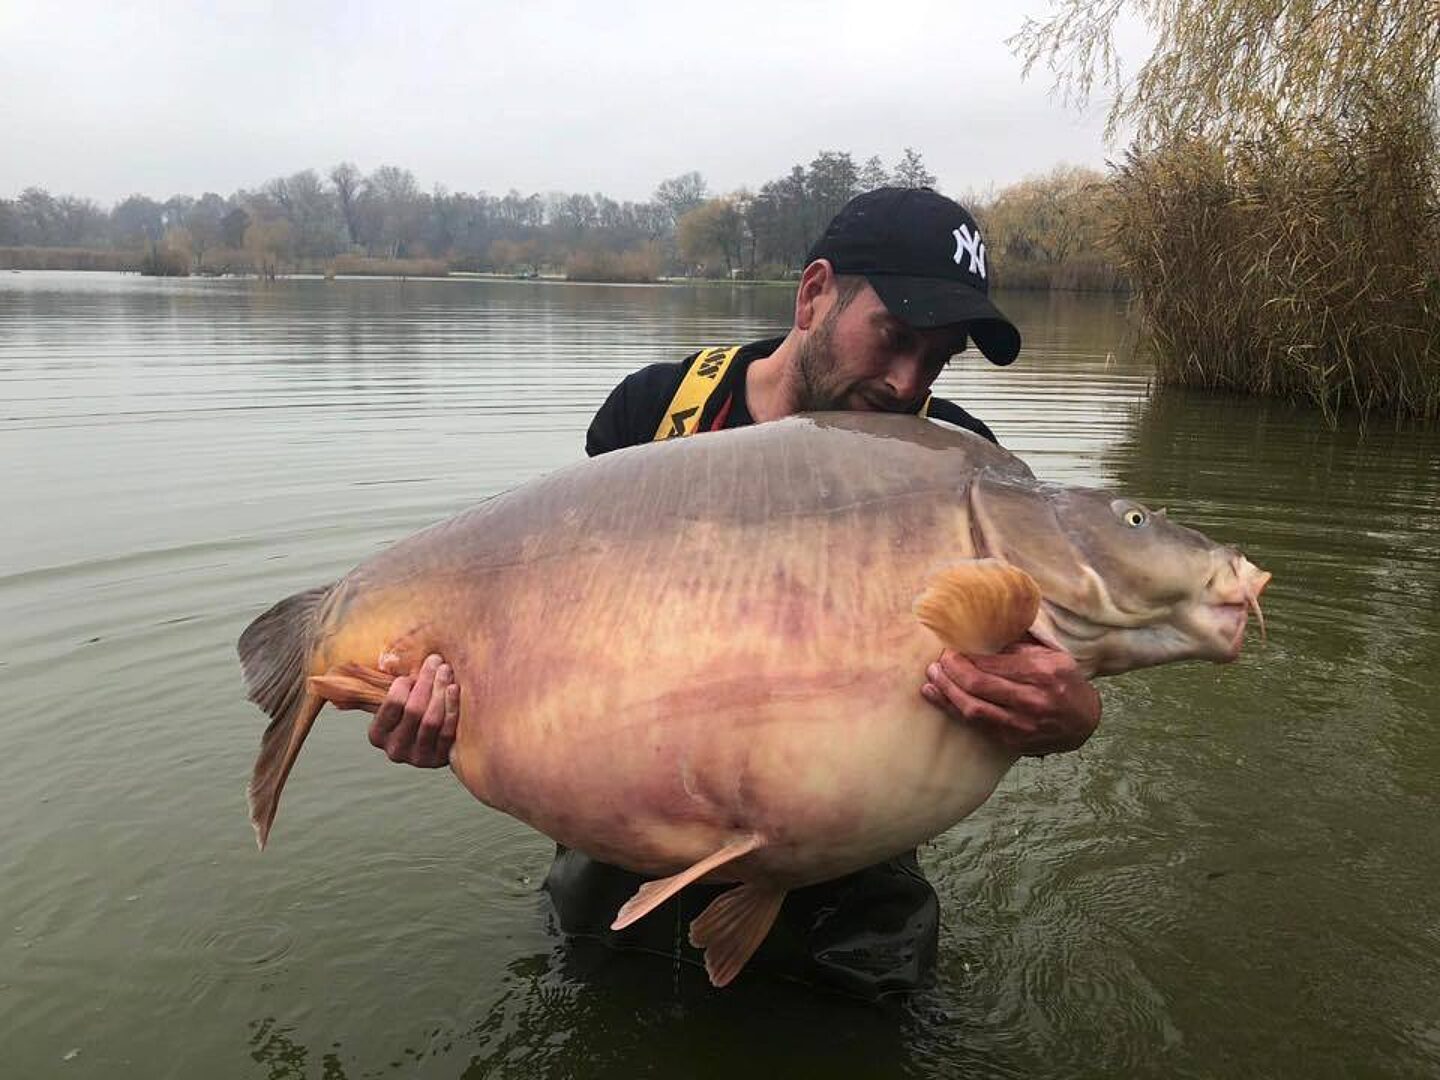 The Biggest Carp Ever Caught in the World